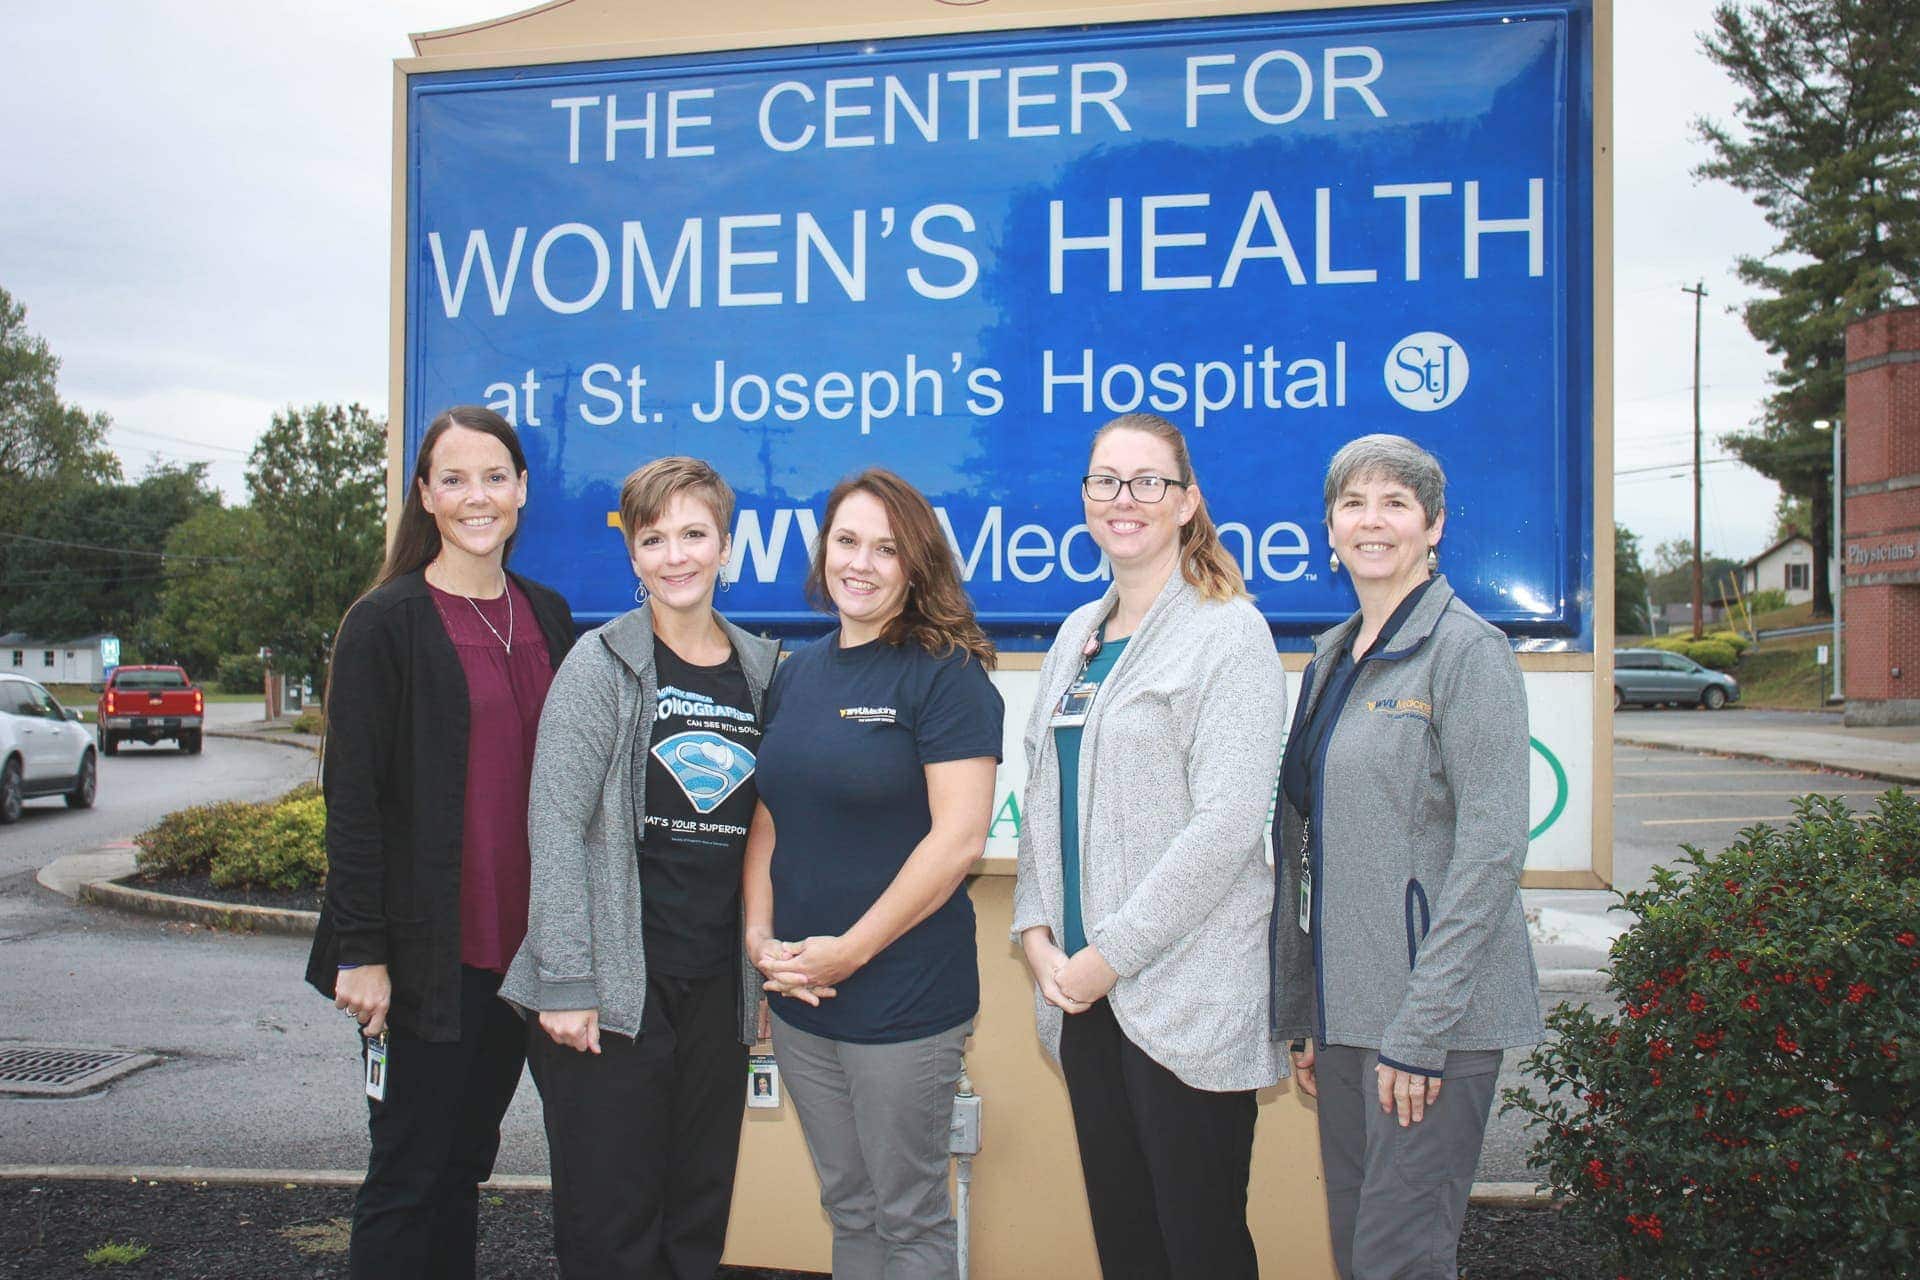 Pictured, left to right: Katherine Keely Burnside, PAC; Sarah Riffle, RDMS; Amanda Ketterman, CNM; Sarah Hicks, CNM; and Kathryn Robinson, CNM.